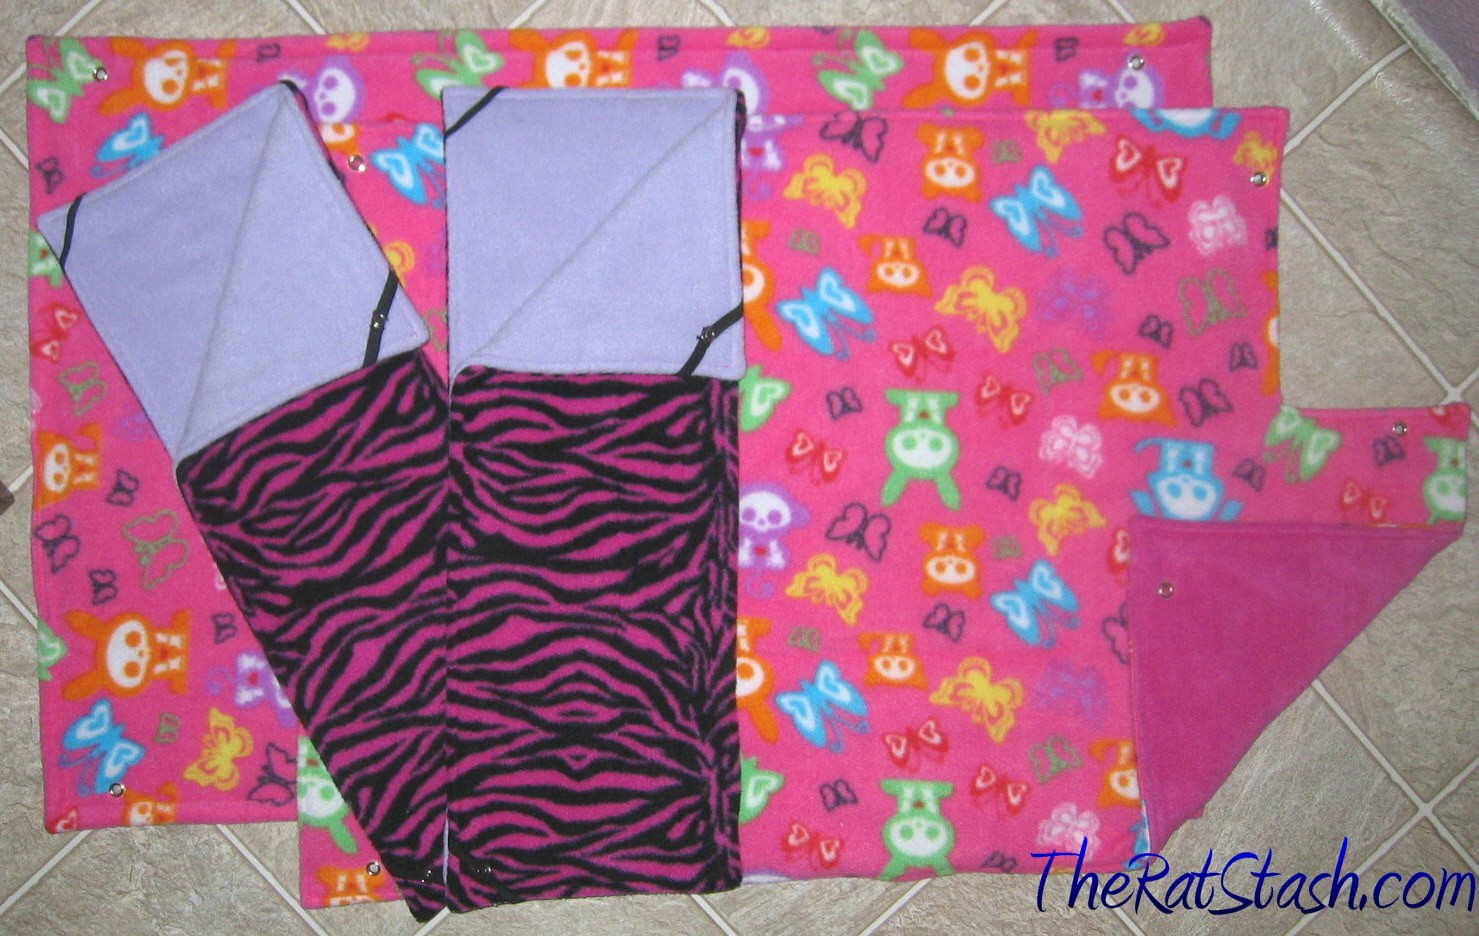 For Darlyn: Double FN/CN Liner Set in "surprise girl" fabric w/ terrycloth & UHaul padding